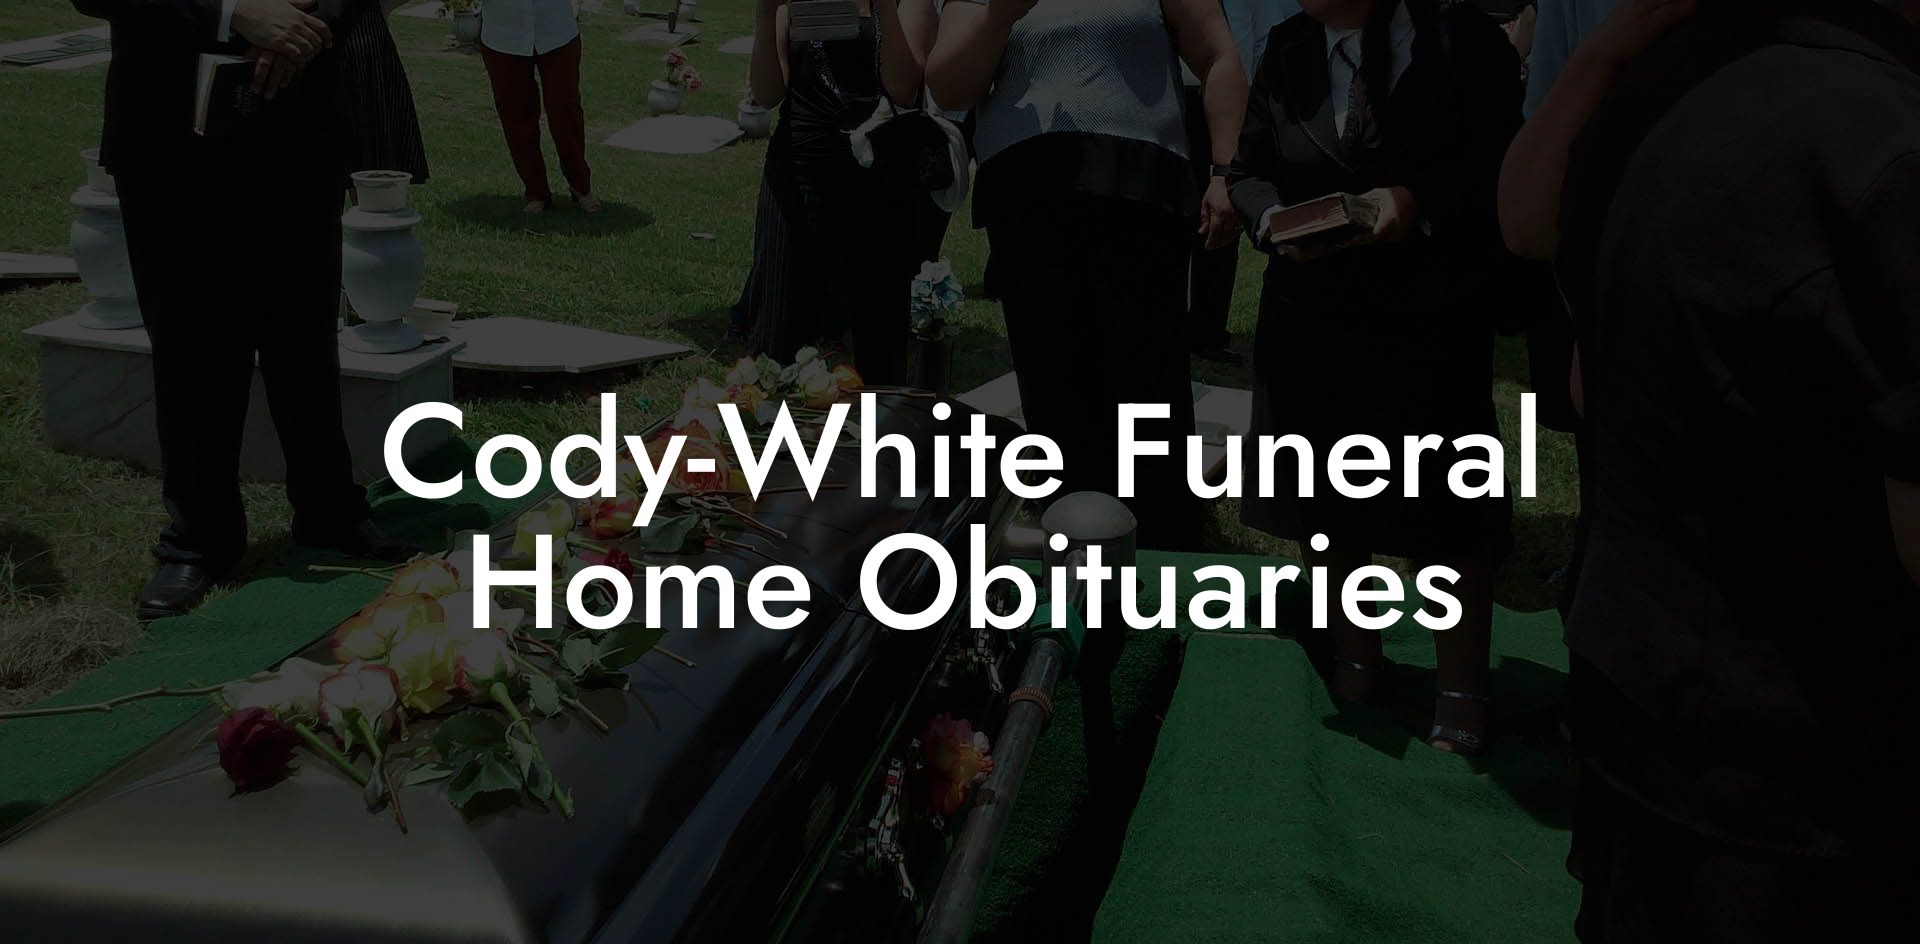 Cody-White Funeral Home Obituaries